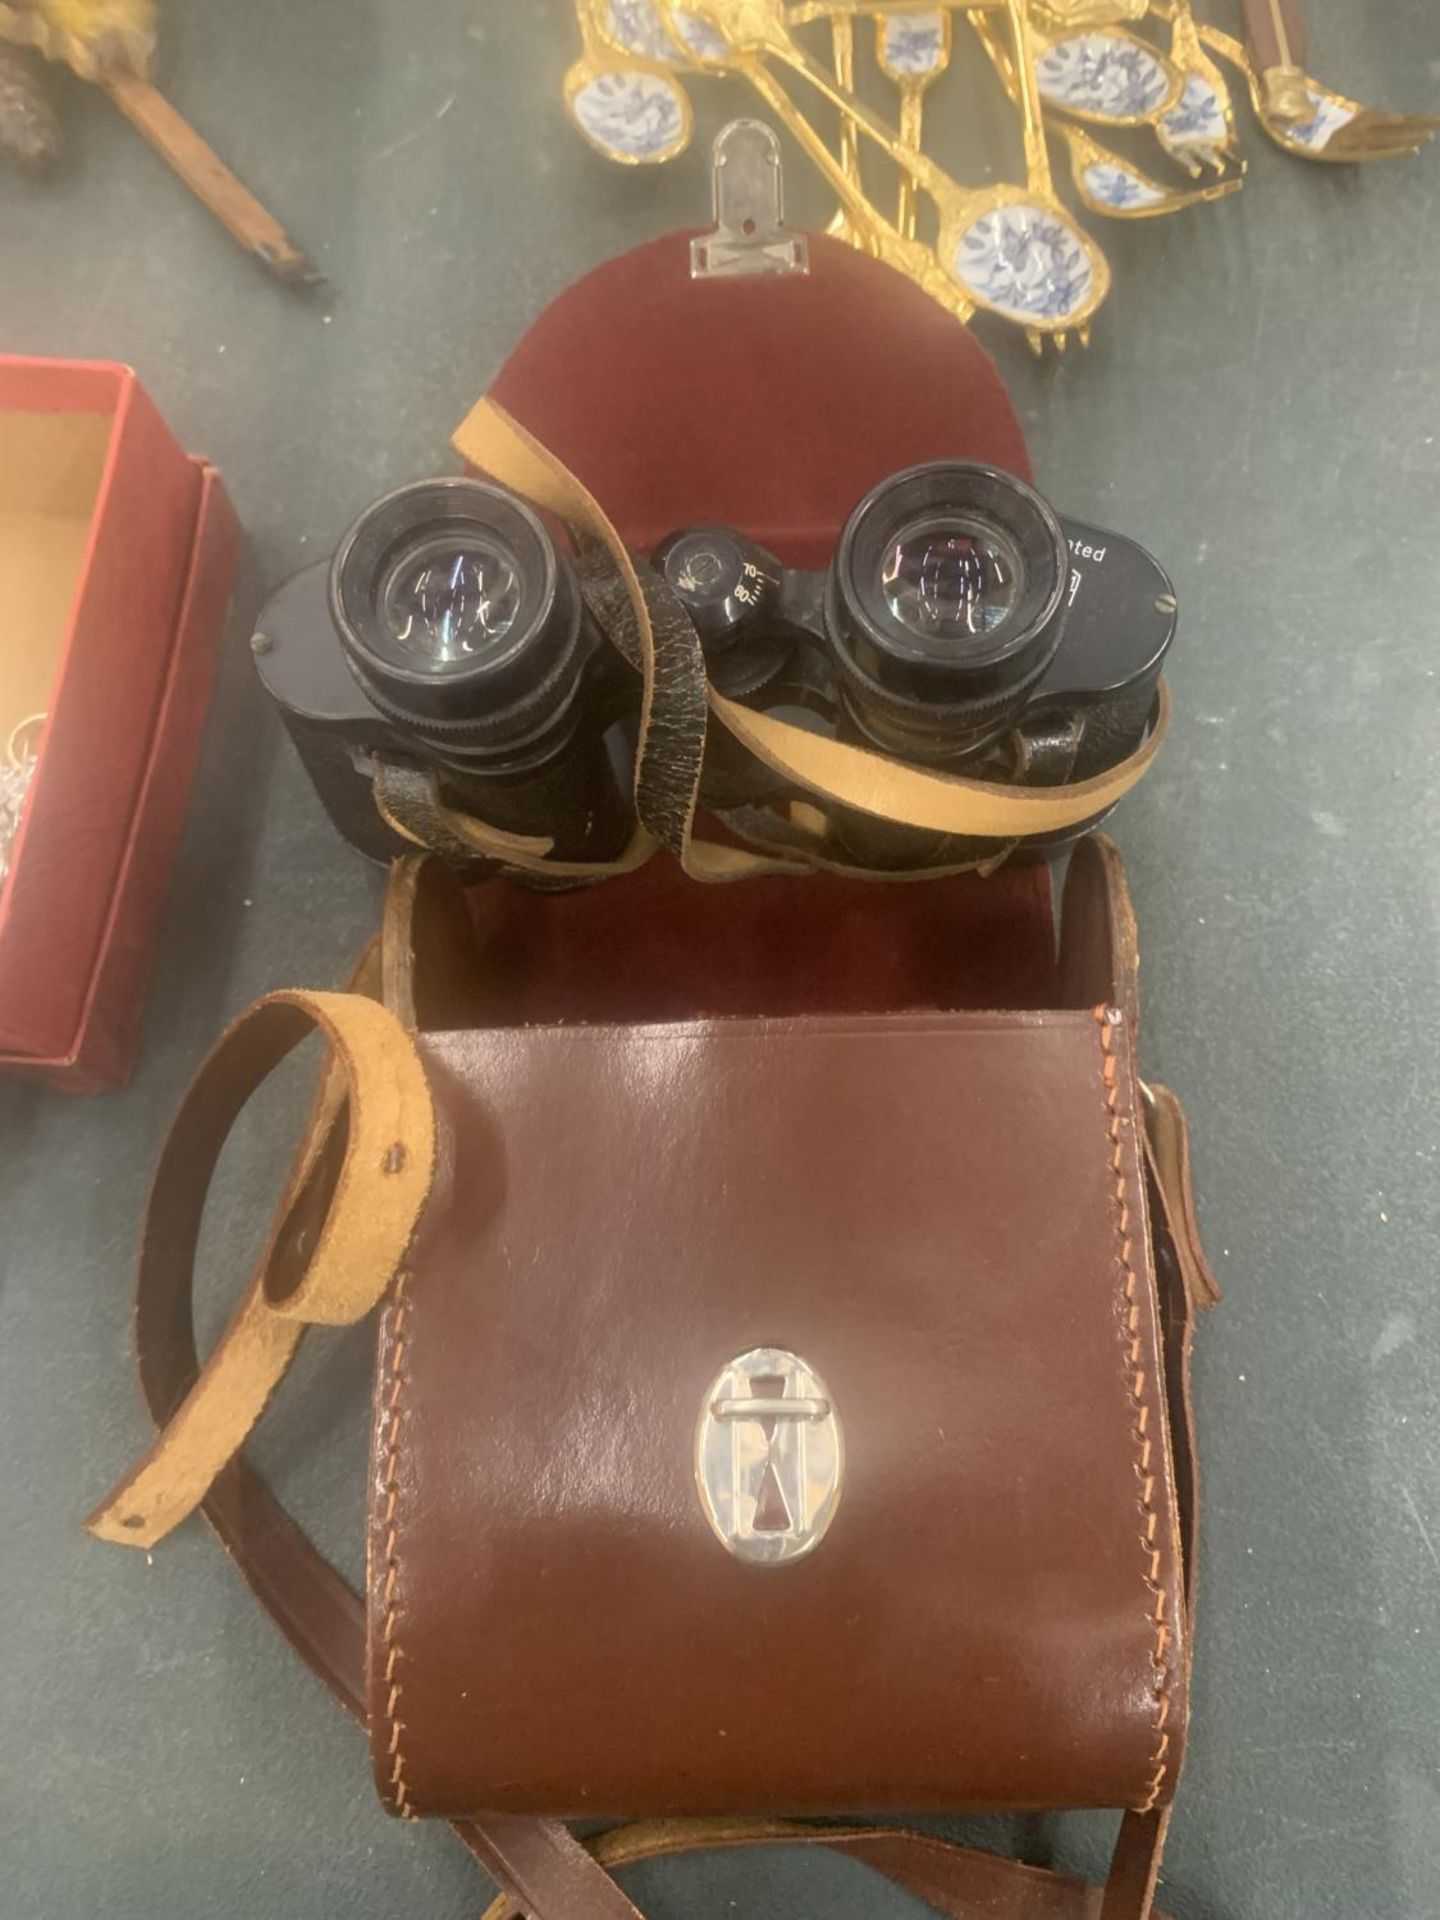 A PAIR OF VINTAGE CARL ZEISS BINOCULARS IN A LEATHER CASE